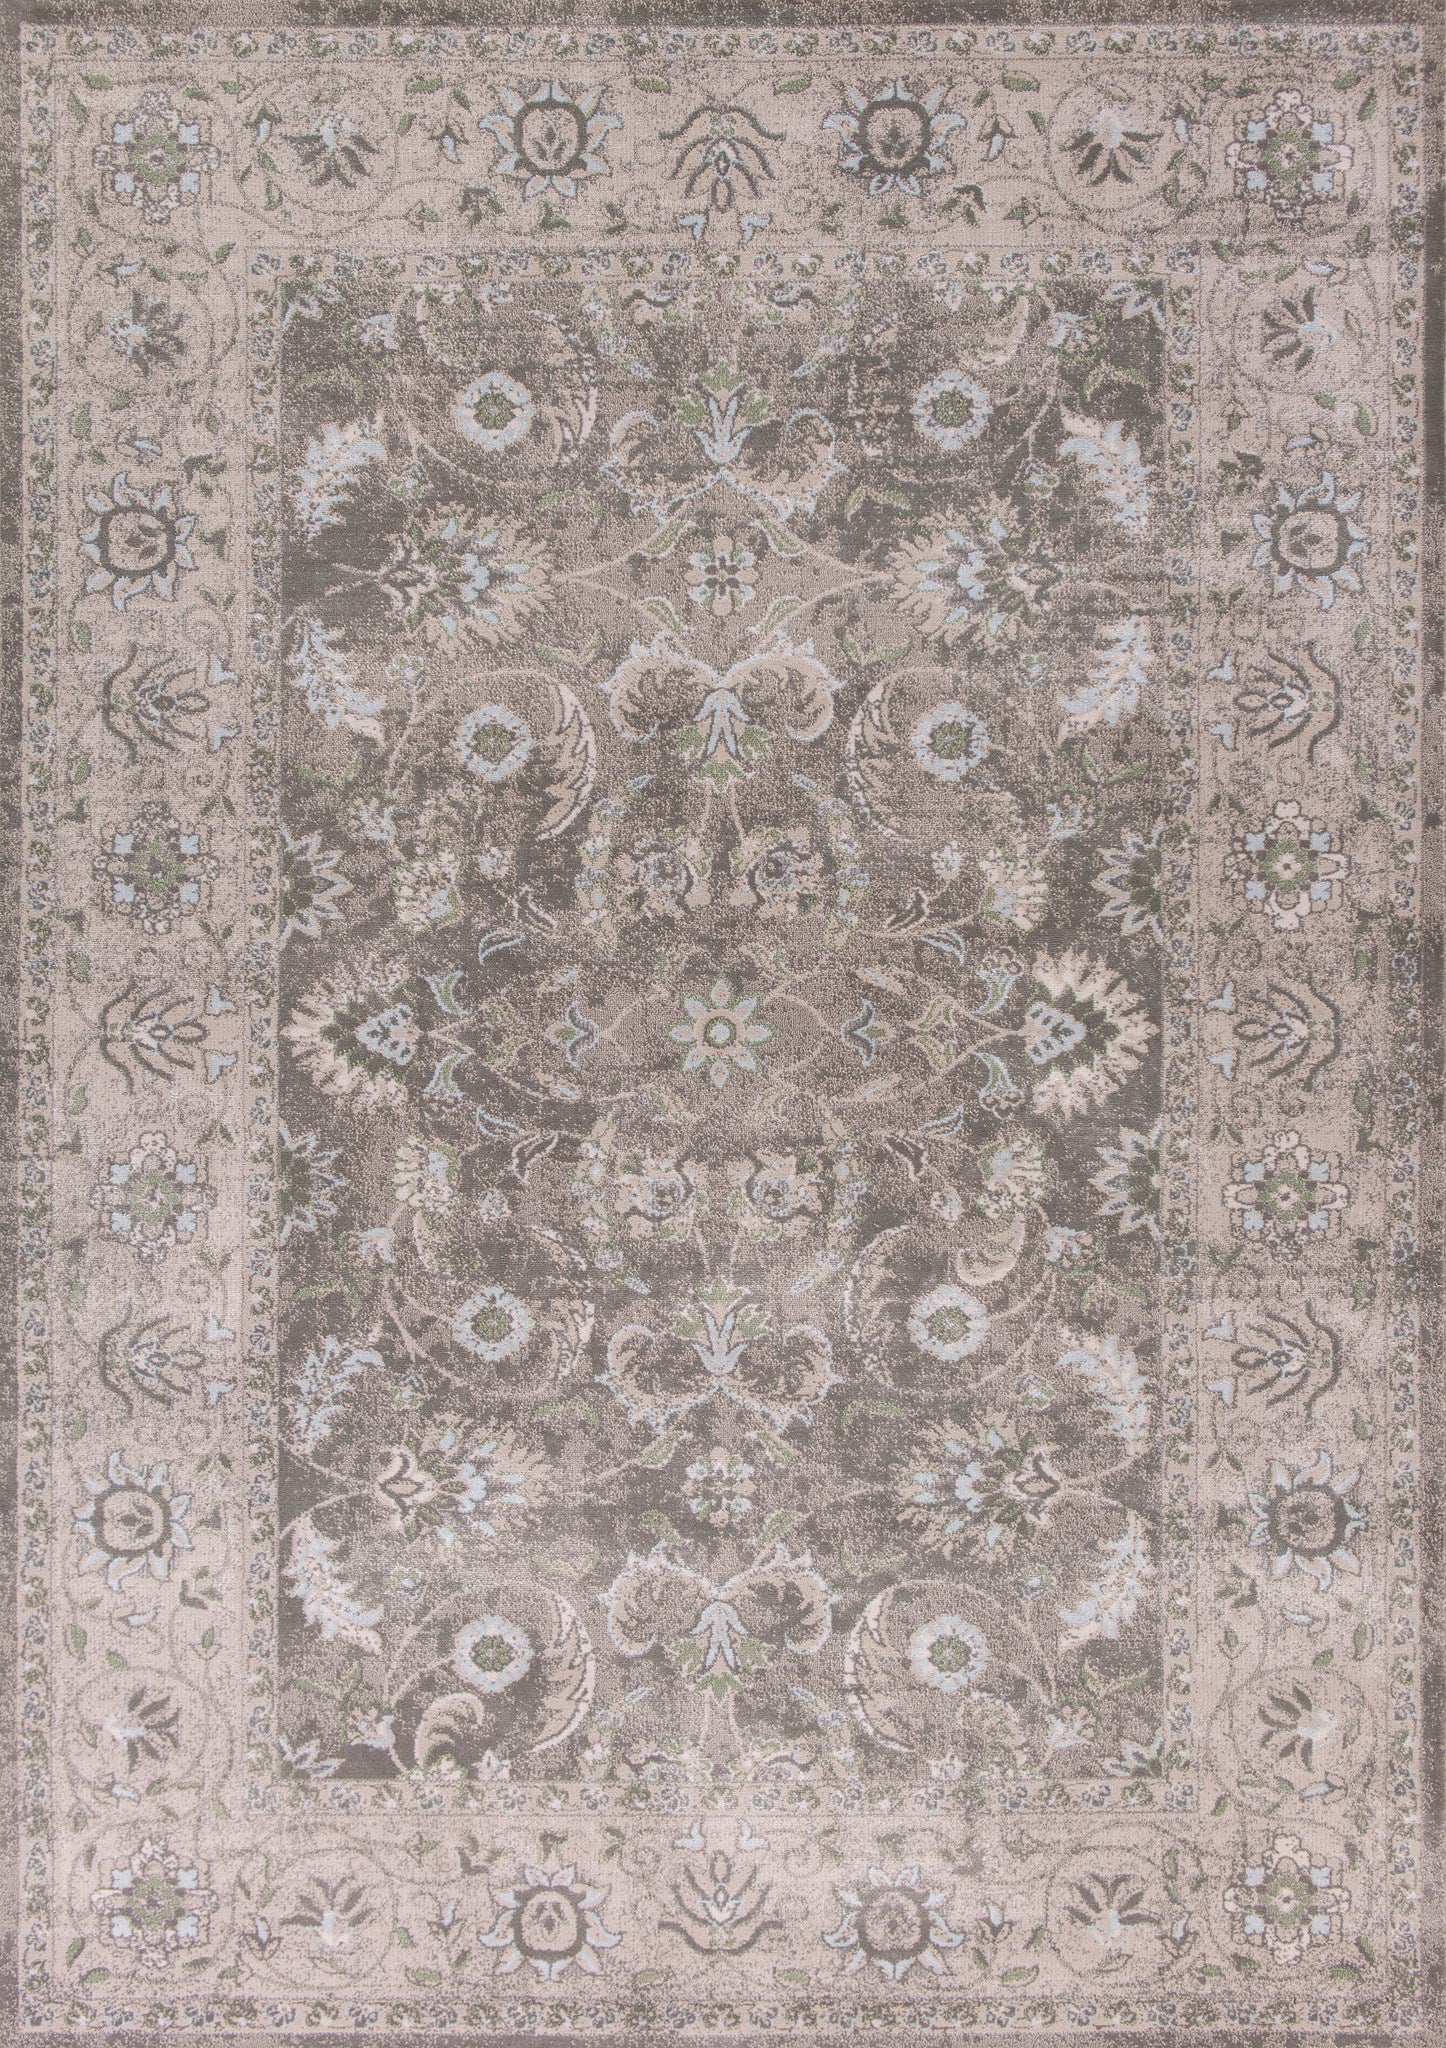 KAS Chandler 4905 Grey/Taupe Imperial Area Rug main image